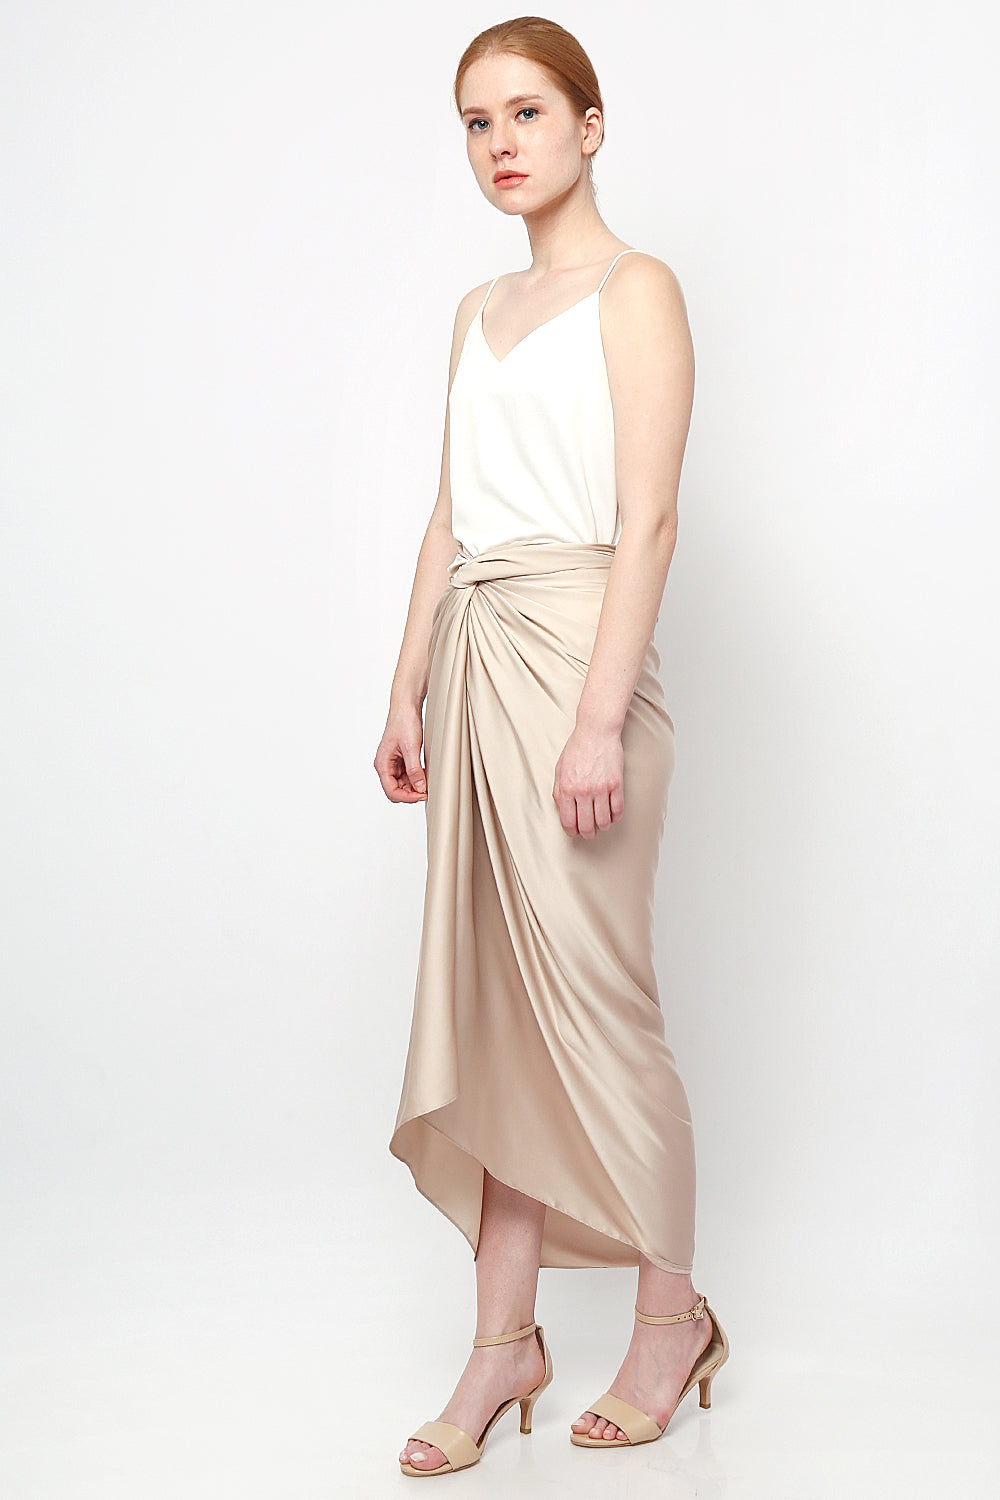 Aisyah Lilit Skirt in Nude